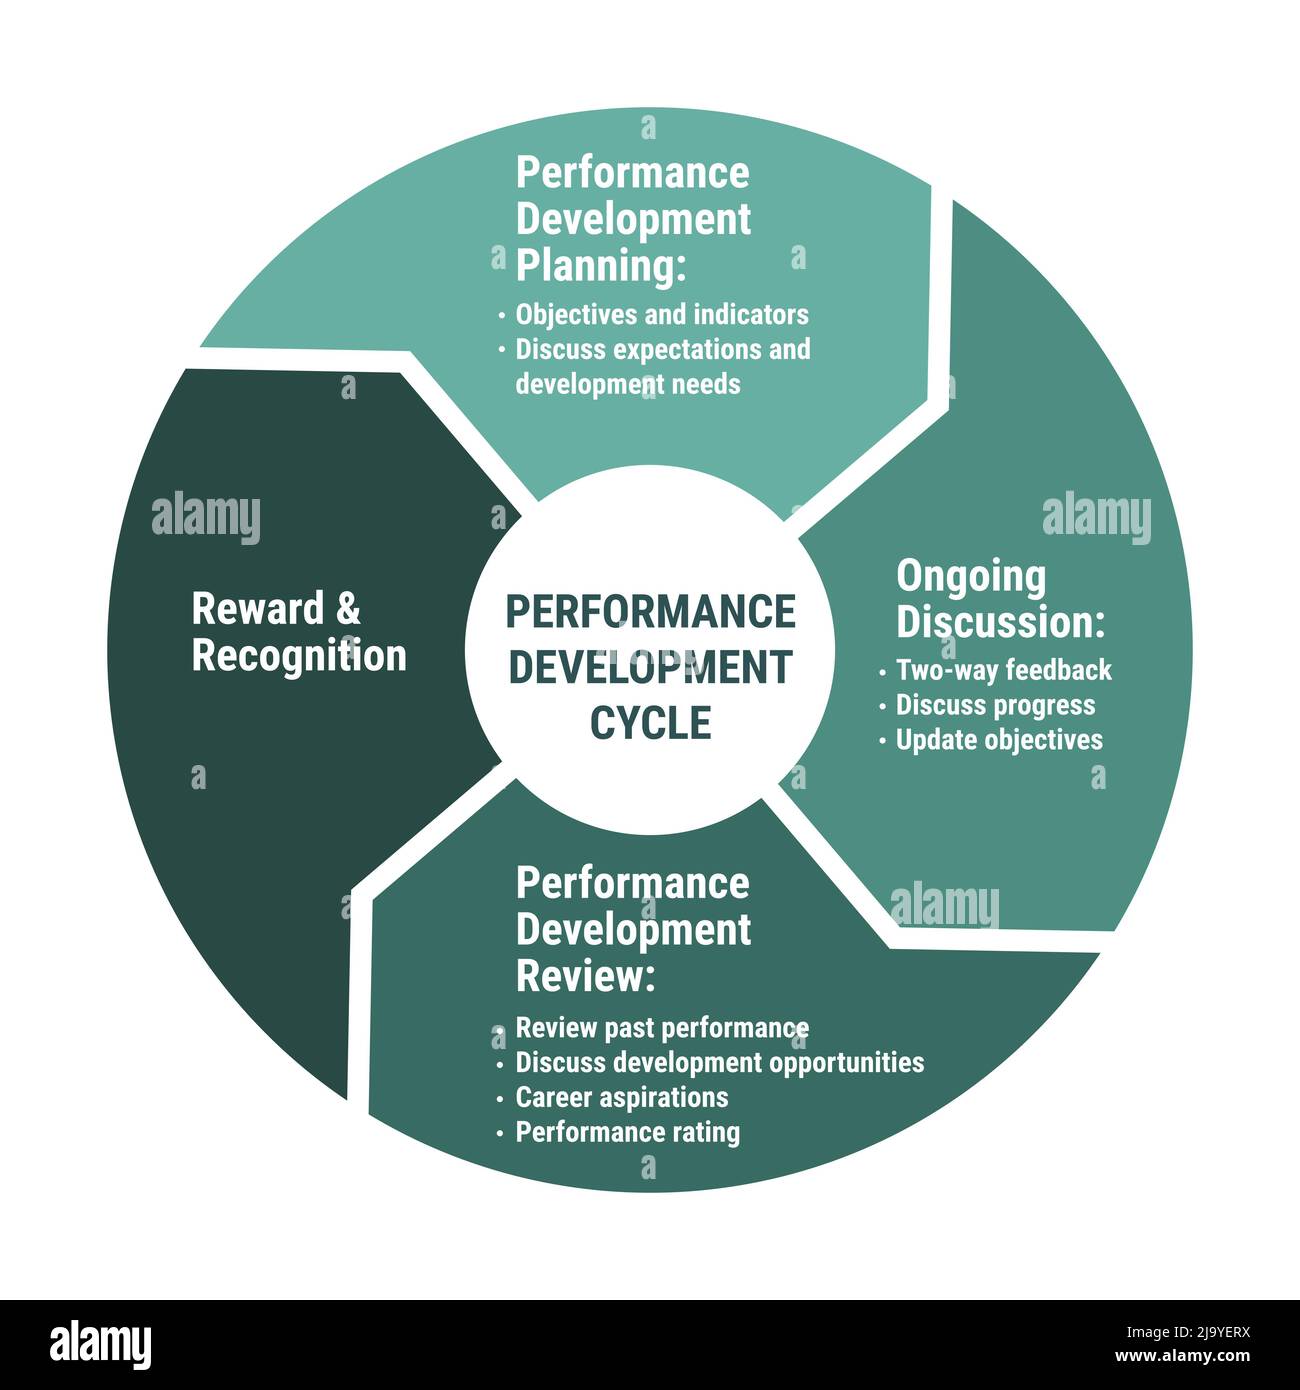 Performance development cycle scheme. Methodology circle diagram with planning, ongoing discussion, review, reward and recognition. Green on white bac Stock Vector